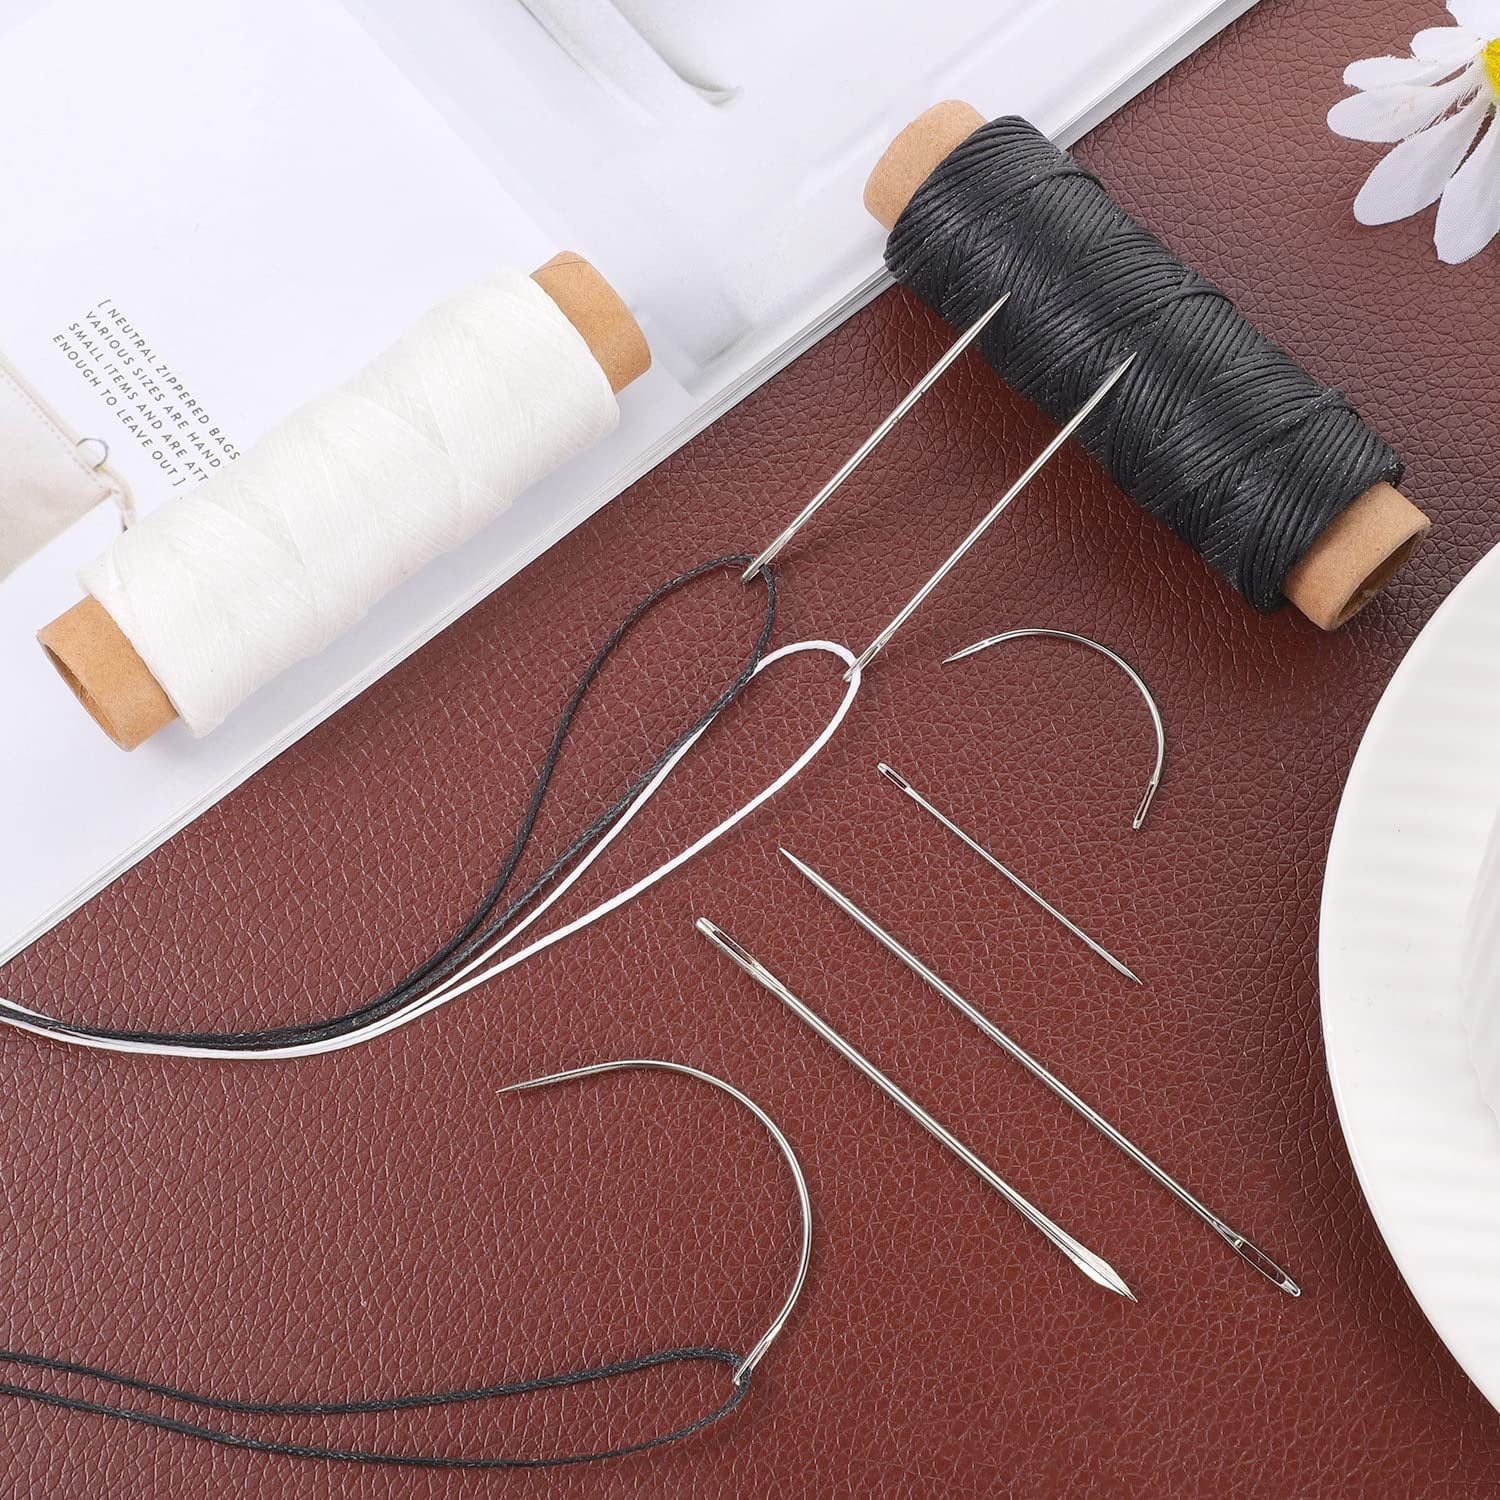 Leather Upholstery Sewing Waxed Thread: PLANTIONAL 218 Yard 150D Wax String  with 25 Large Eye Hand Sewing Needles, Heavy Duty Sewing Kit for Car Sofa